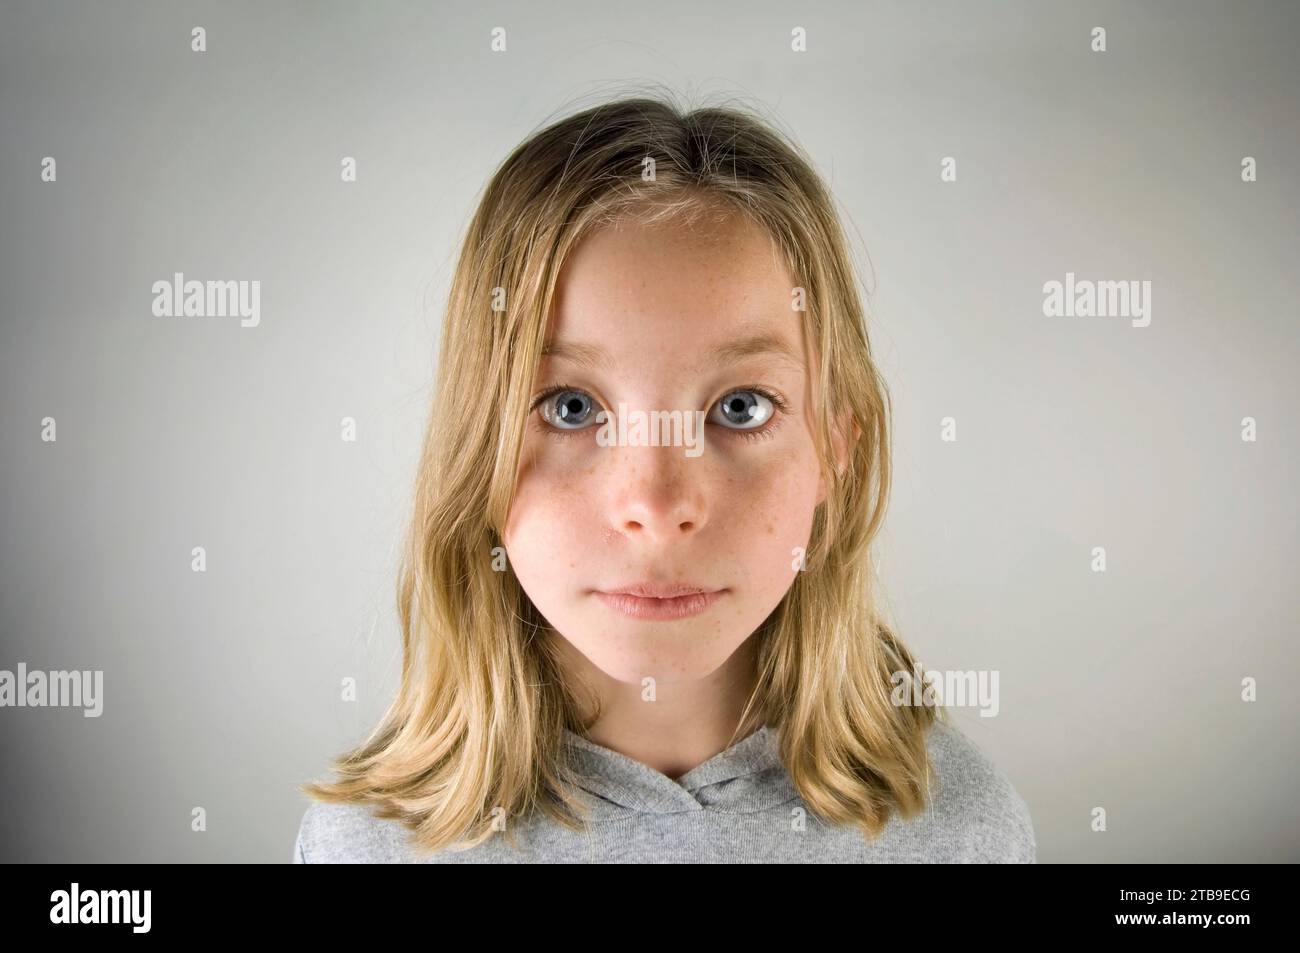 Portrait of a young girl with blond hair and blue eyes against a grey background; Studio Stock Photo